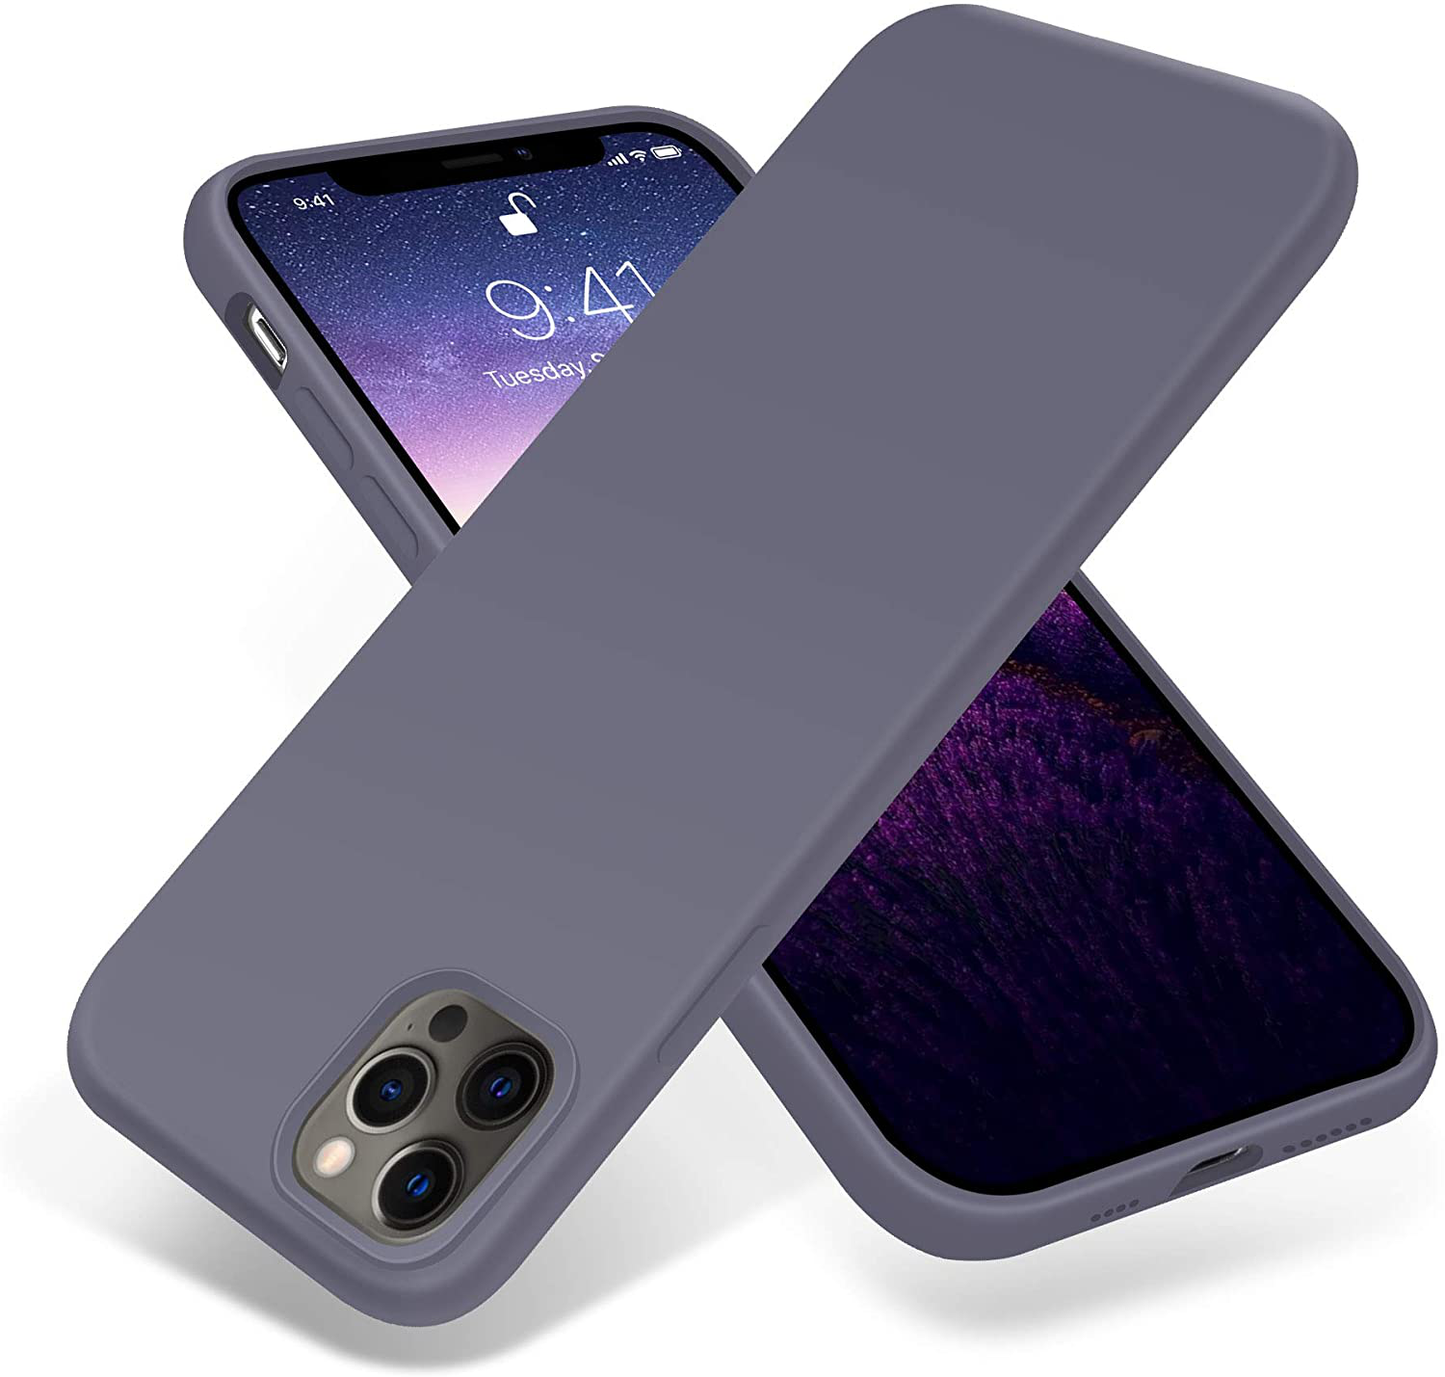 Silky and Soft Touch Series Premium Soft Liquid Silicone Rubber Full-Body Protective Bumper Case Compatible with iPhone 12 Pro Max Case 6.7 inch